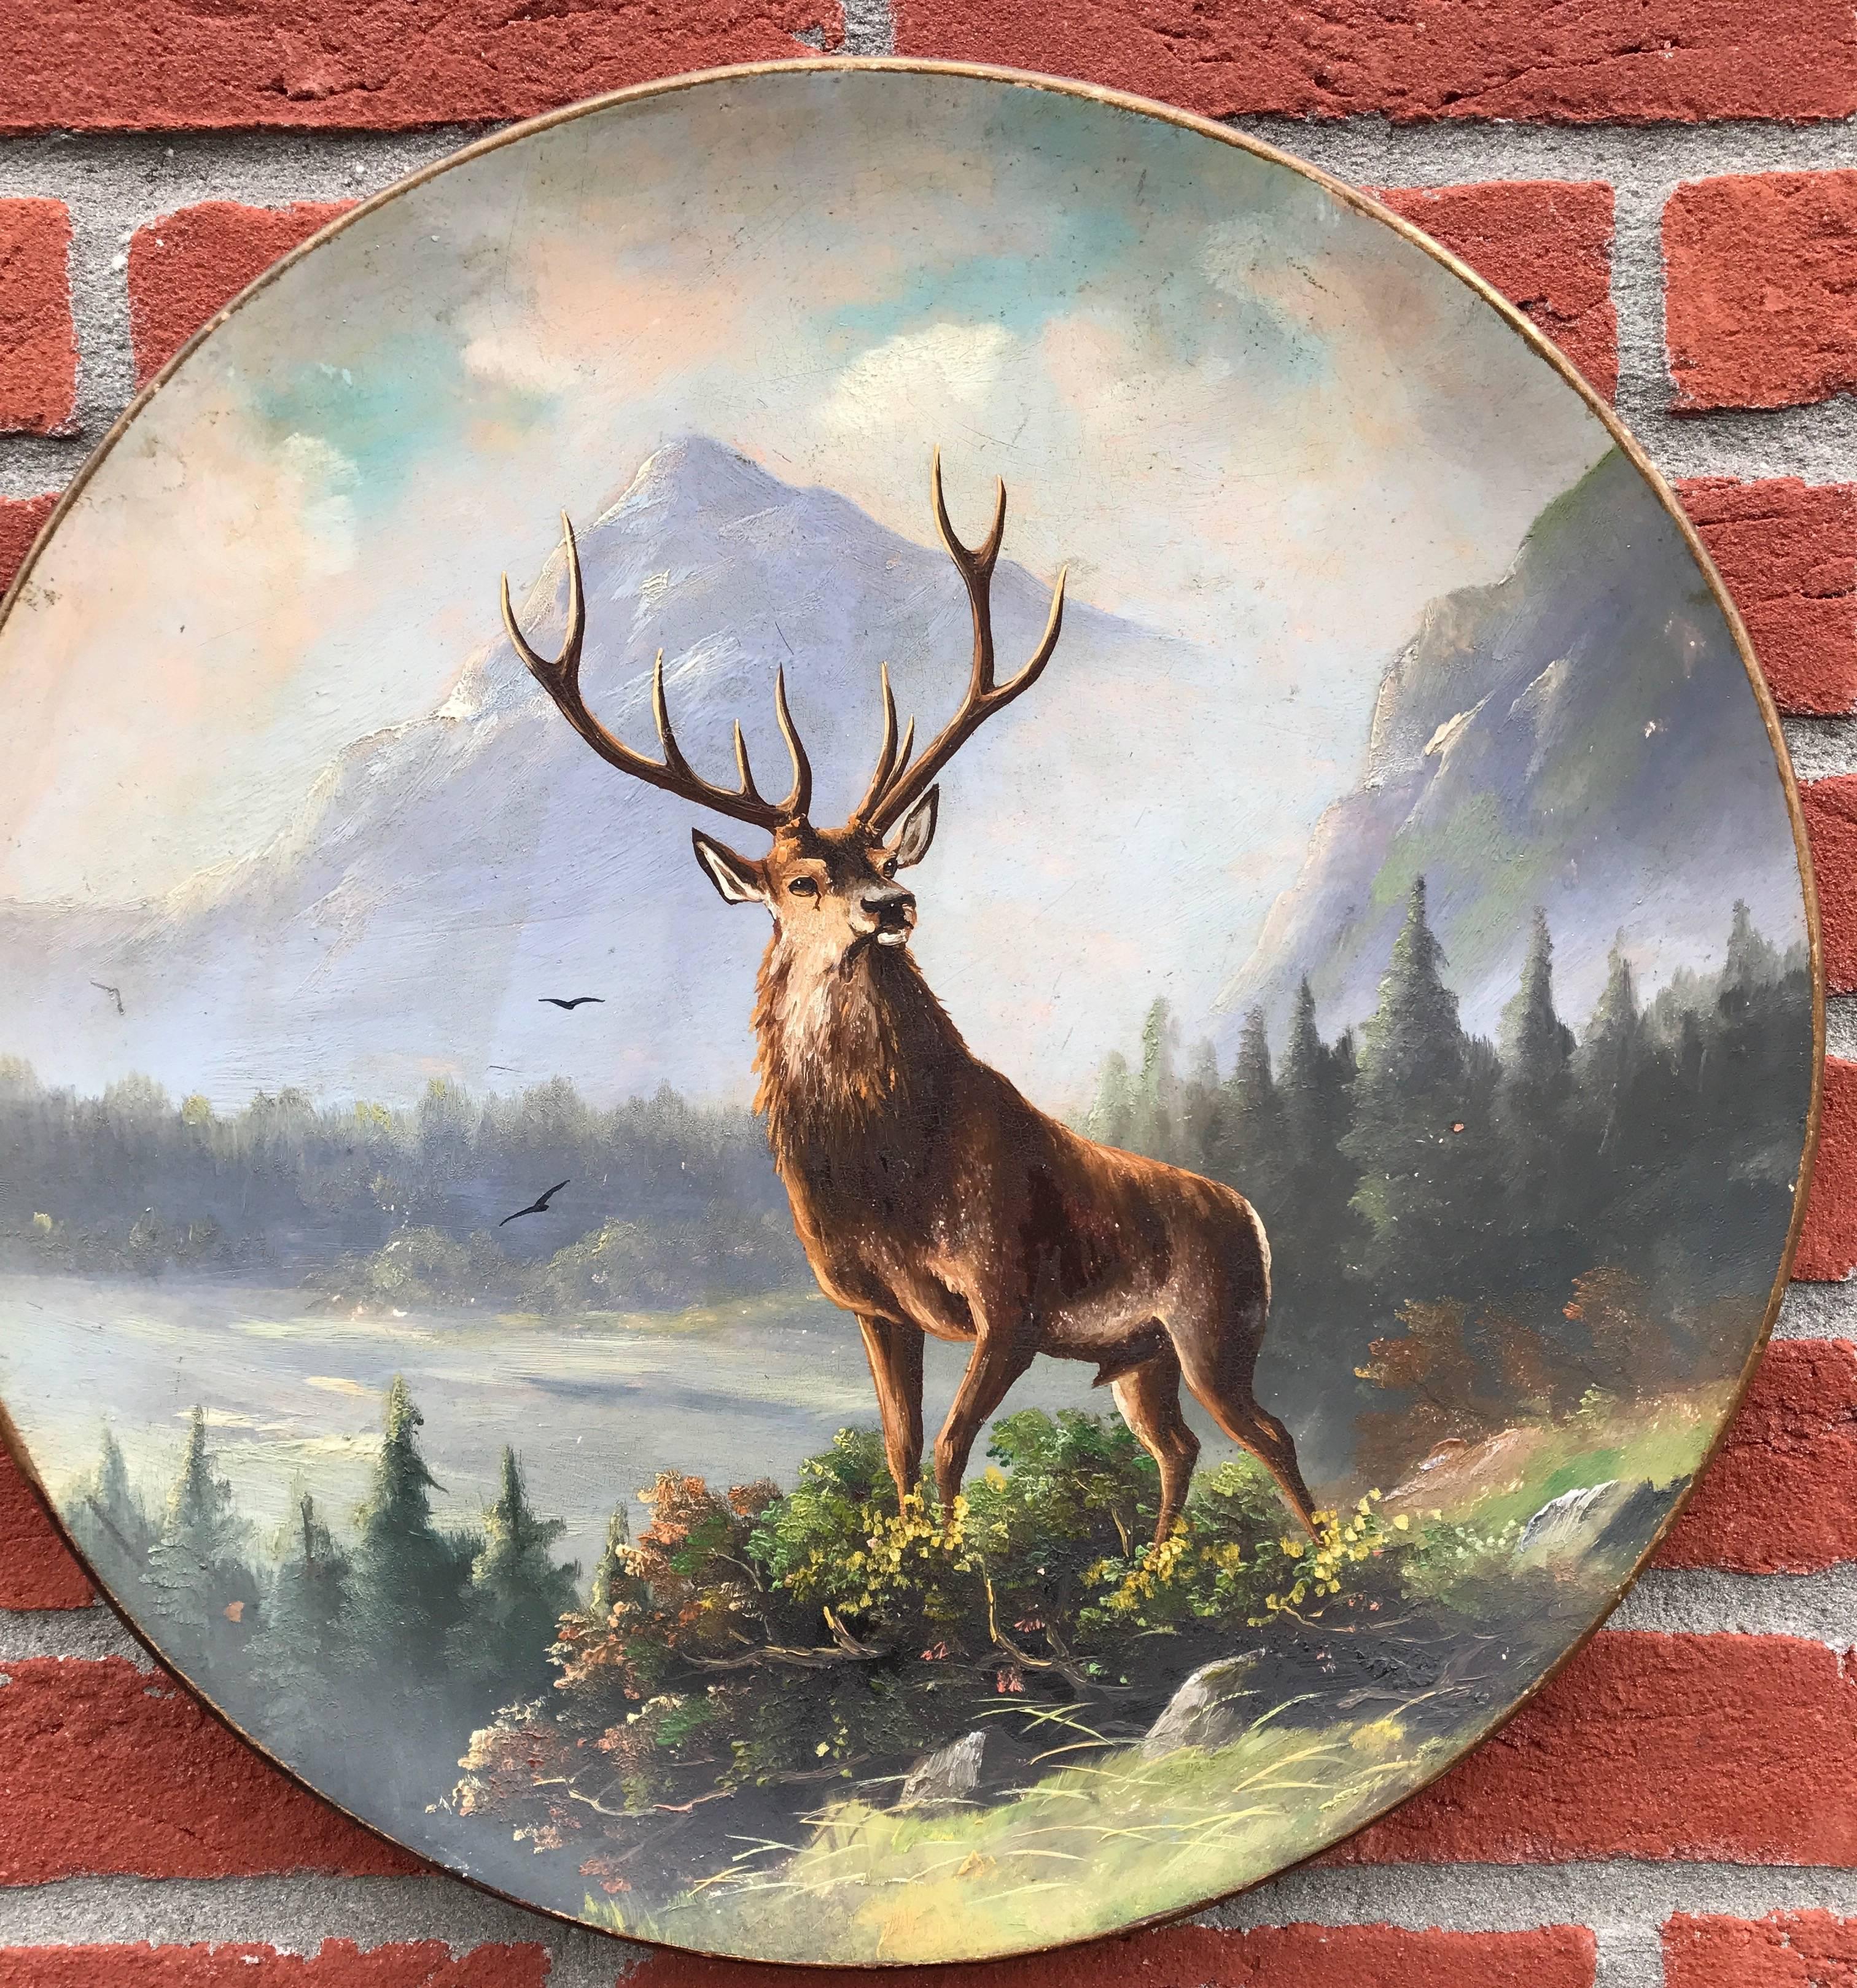 Sizeable and decorative wall plates depicting wildlife in the mountains.

These are not your average, transfer printed wall plaques or plates. These sizeable plates each come with a unique and hand-painted picture of a wildlife scene. Both plates